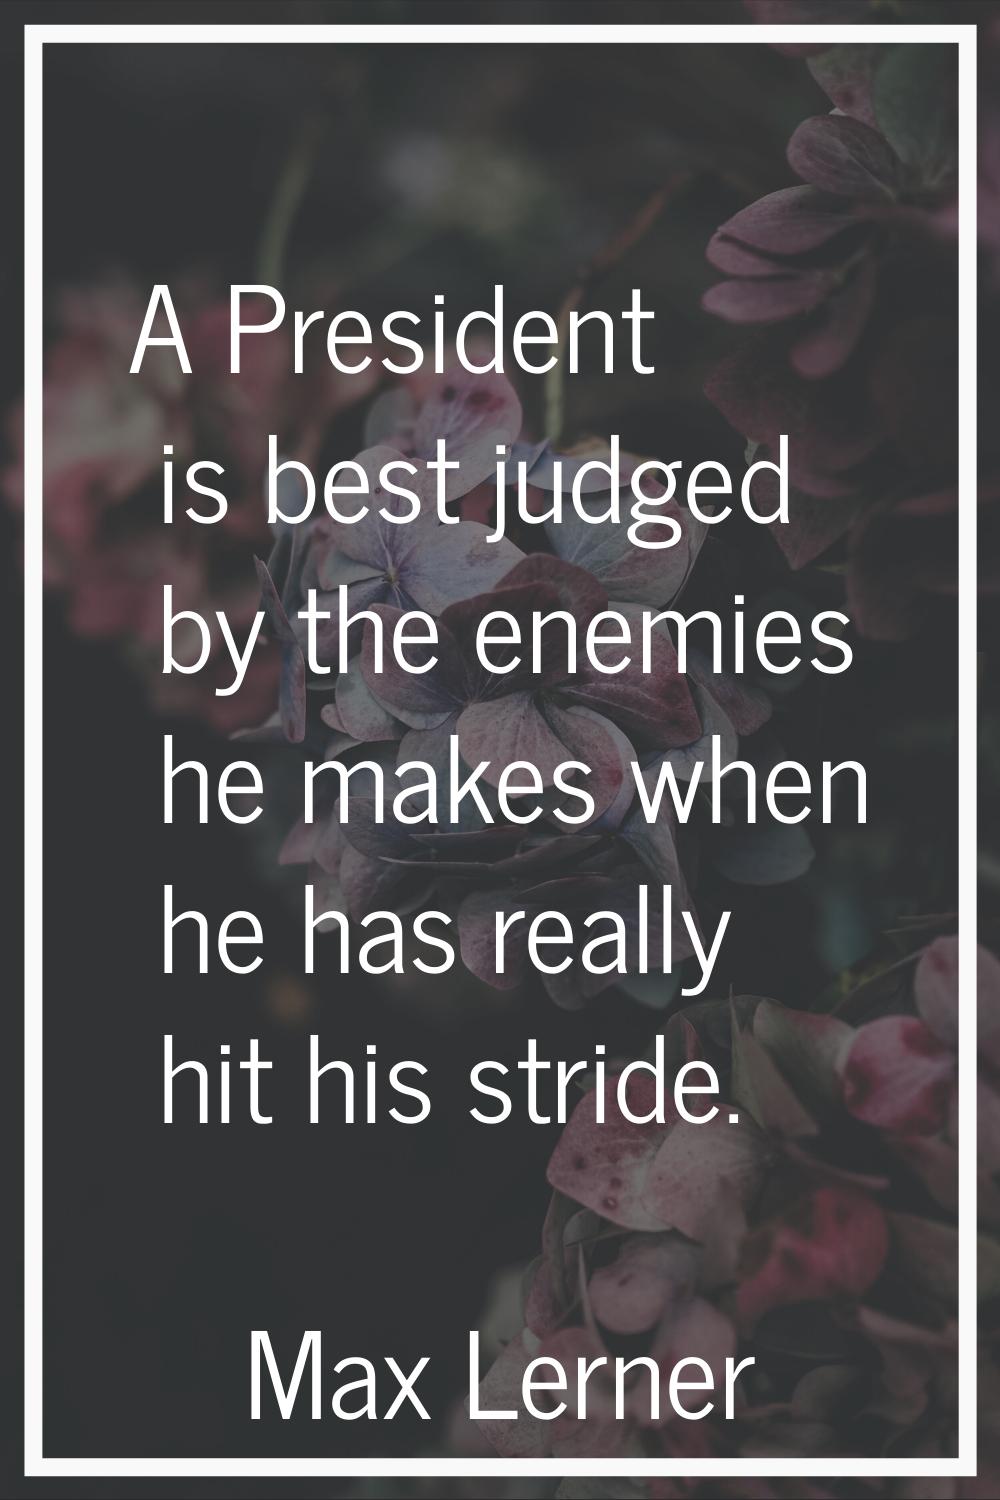 A President is best judged by the enemies he makes when he has really hit his stride.